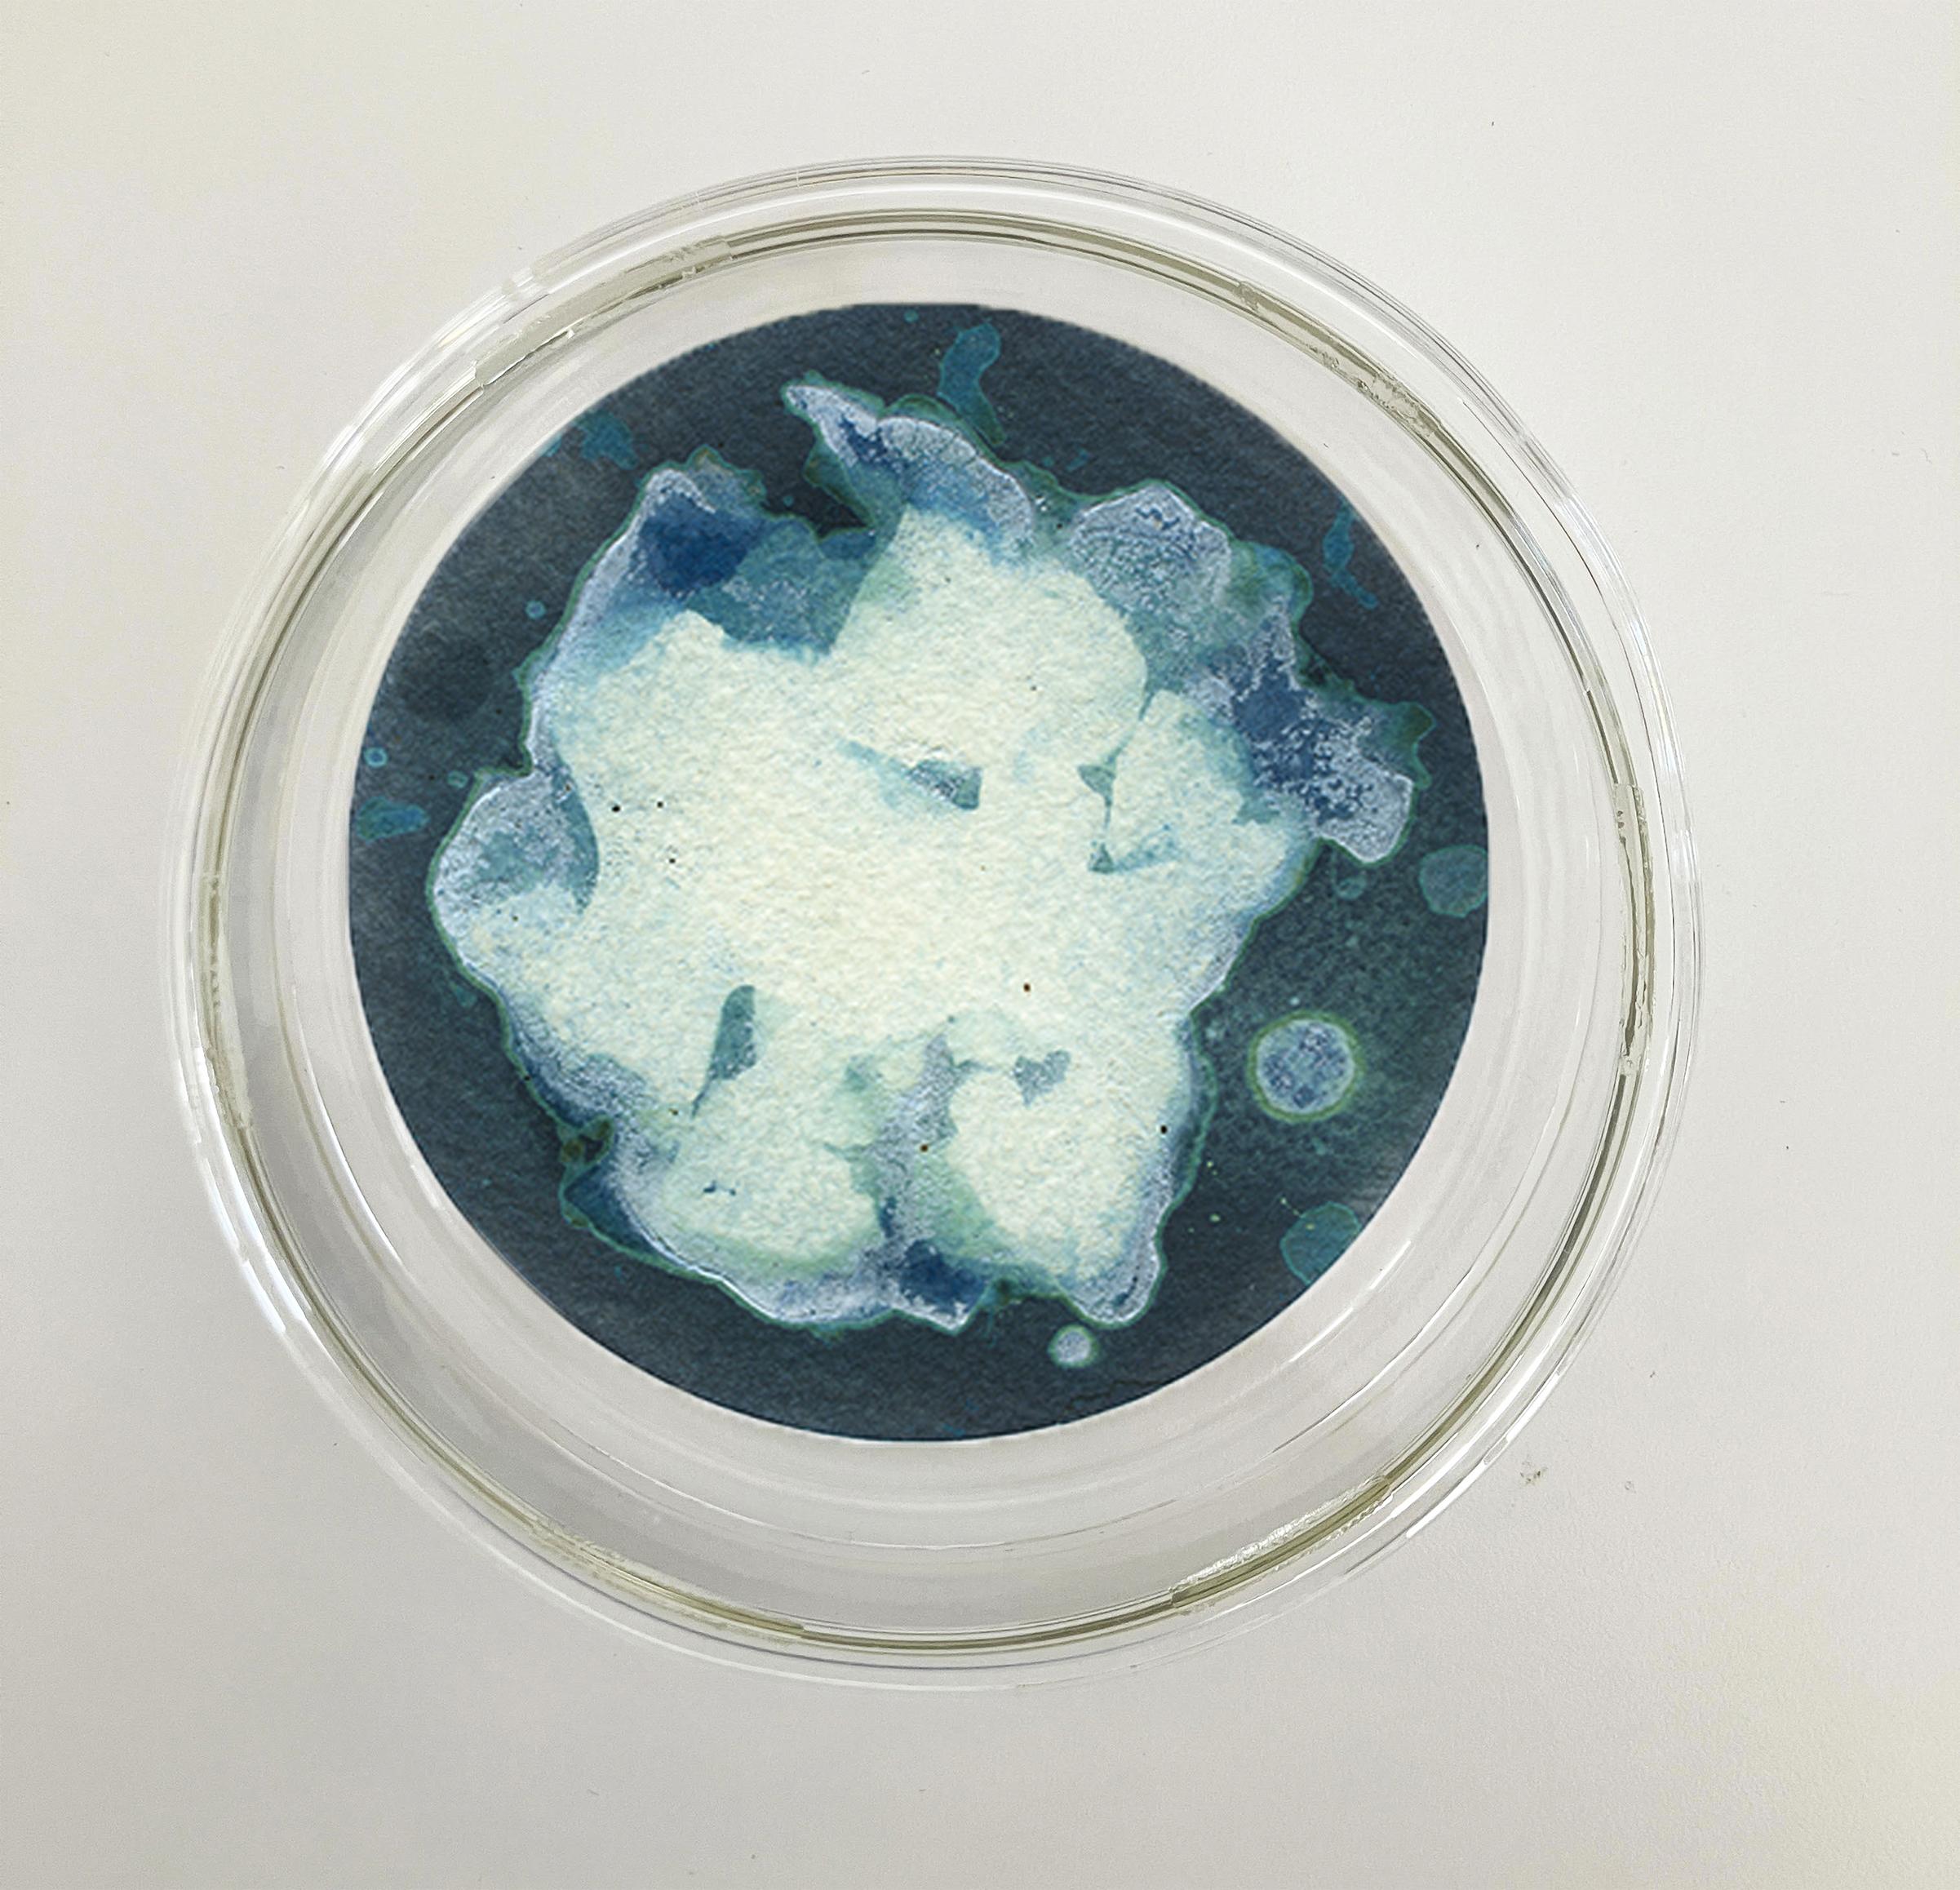 Sal 22, 23 y 24. Cyanotype photograhs mounted in high resistance glass dish - Abstract Sculpture by Paola Davila